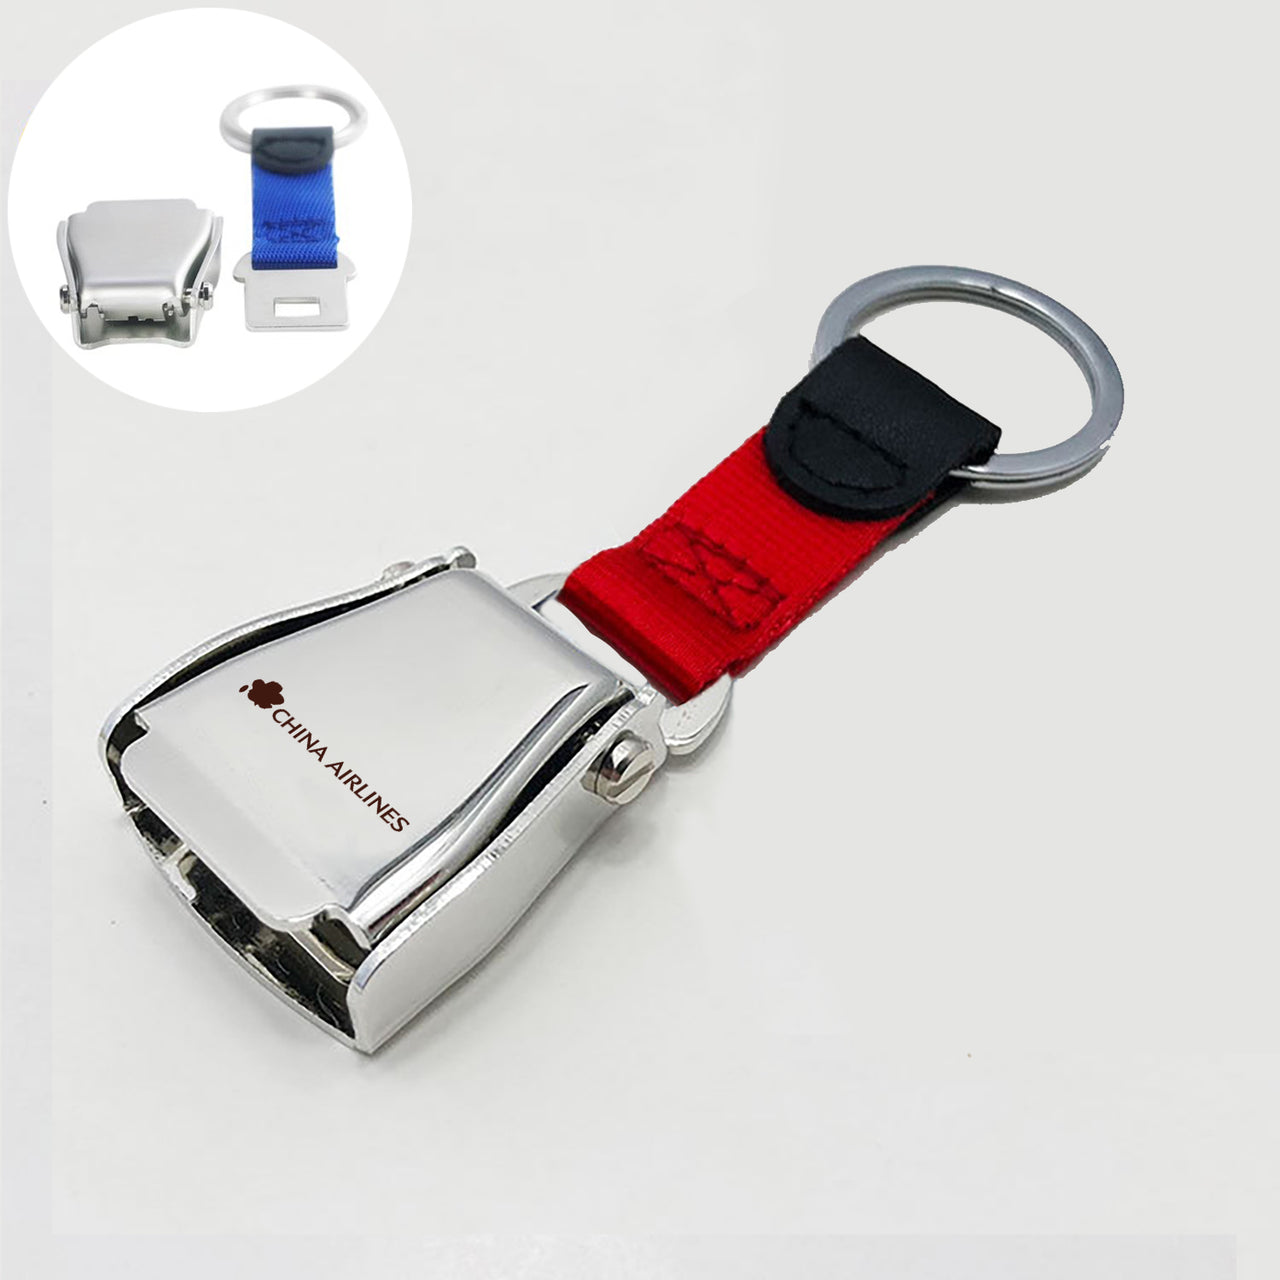 China Airlines Designed Airplane Seat Belt Key Chains